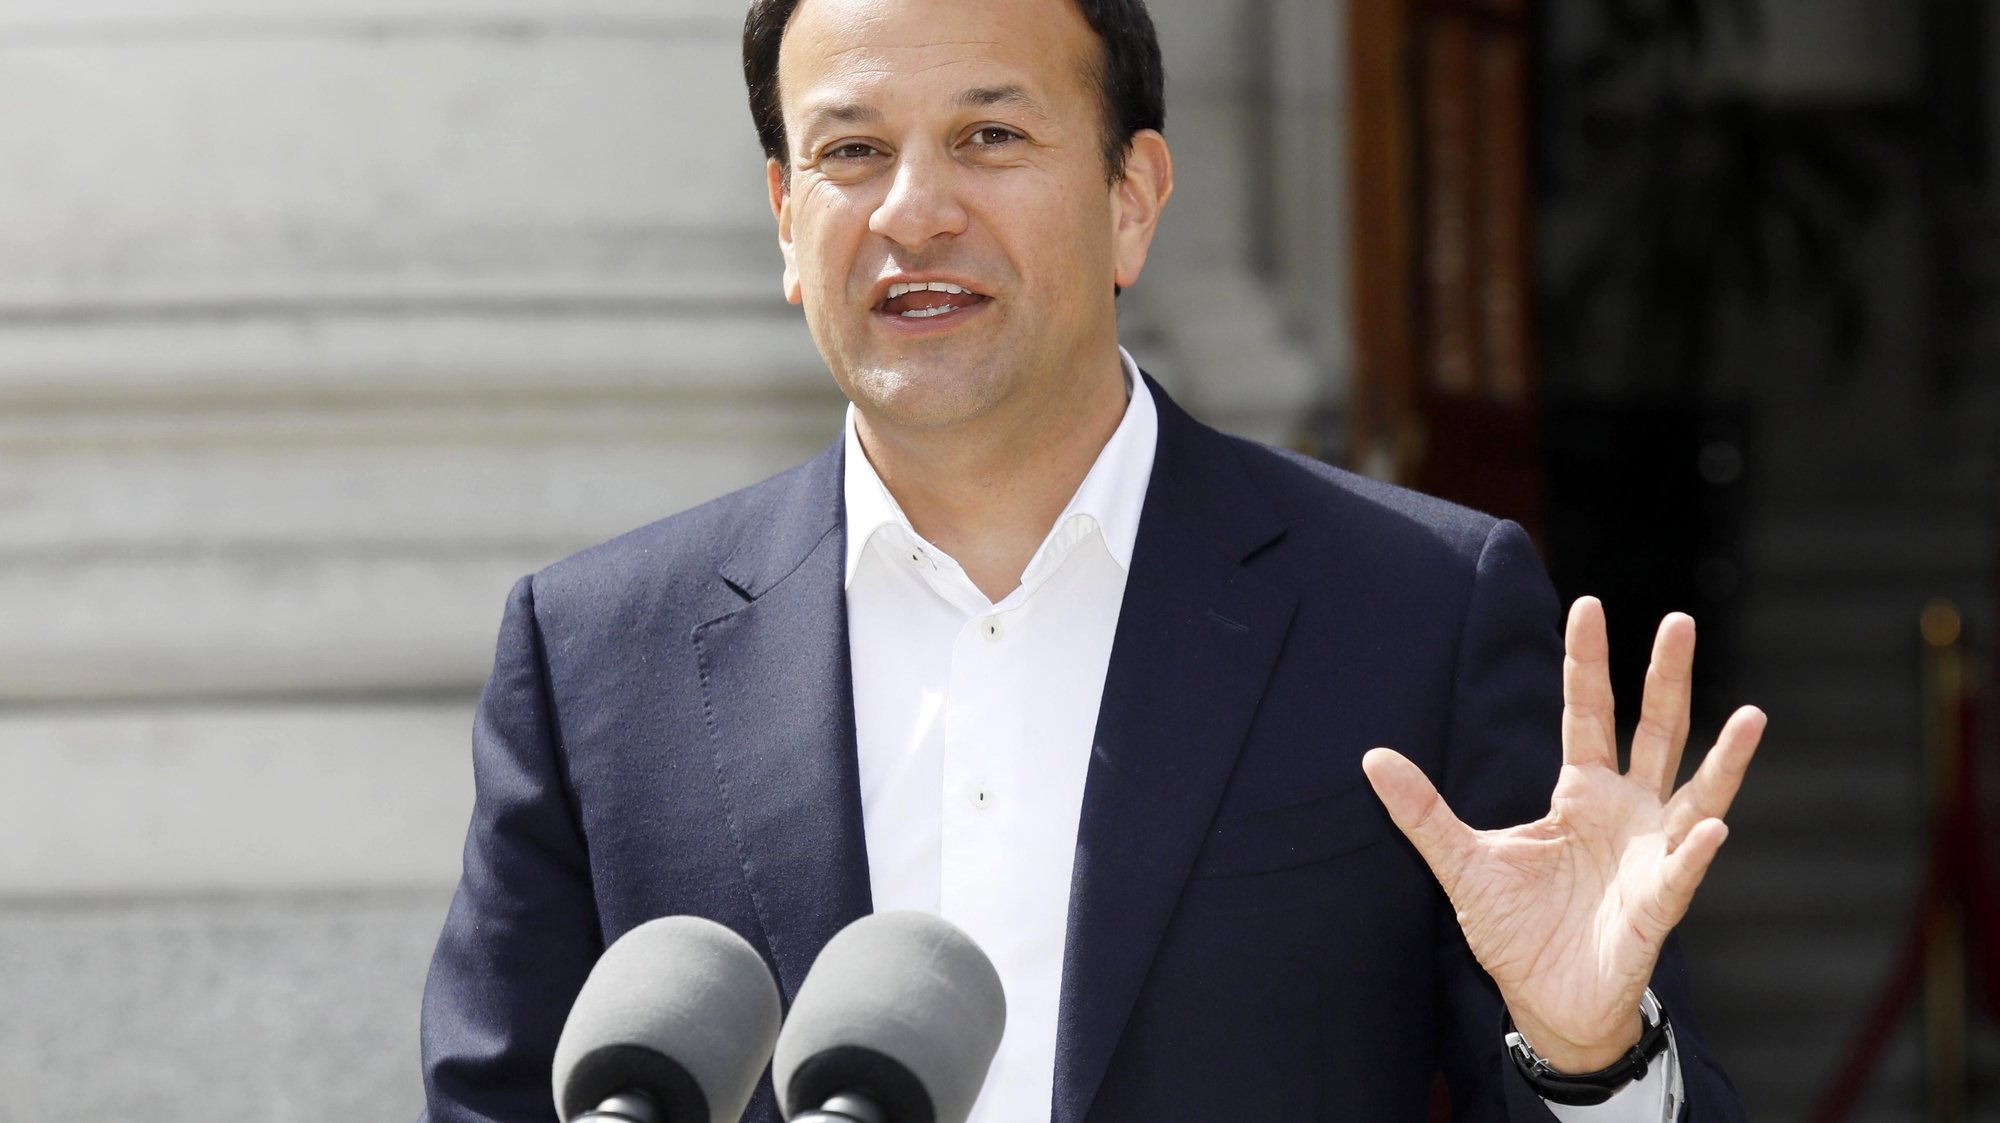 epa08452561 Irish Prime Minister An Taoiseach Leo Varadkar gestures outside Government Buildings in Dublin, Ireland, 29 May 2020, as he briefed media on topics including Brexit and the response to the ongoing pandemic of the COVID-19 disease caused by the SARS-CoV-2 coronavirus following a Cabinet meeting.  EPA/Photocall Ireland / POOL